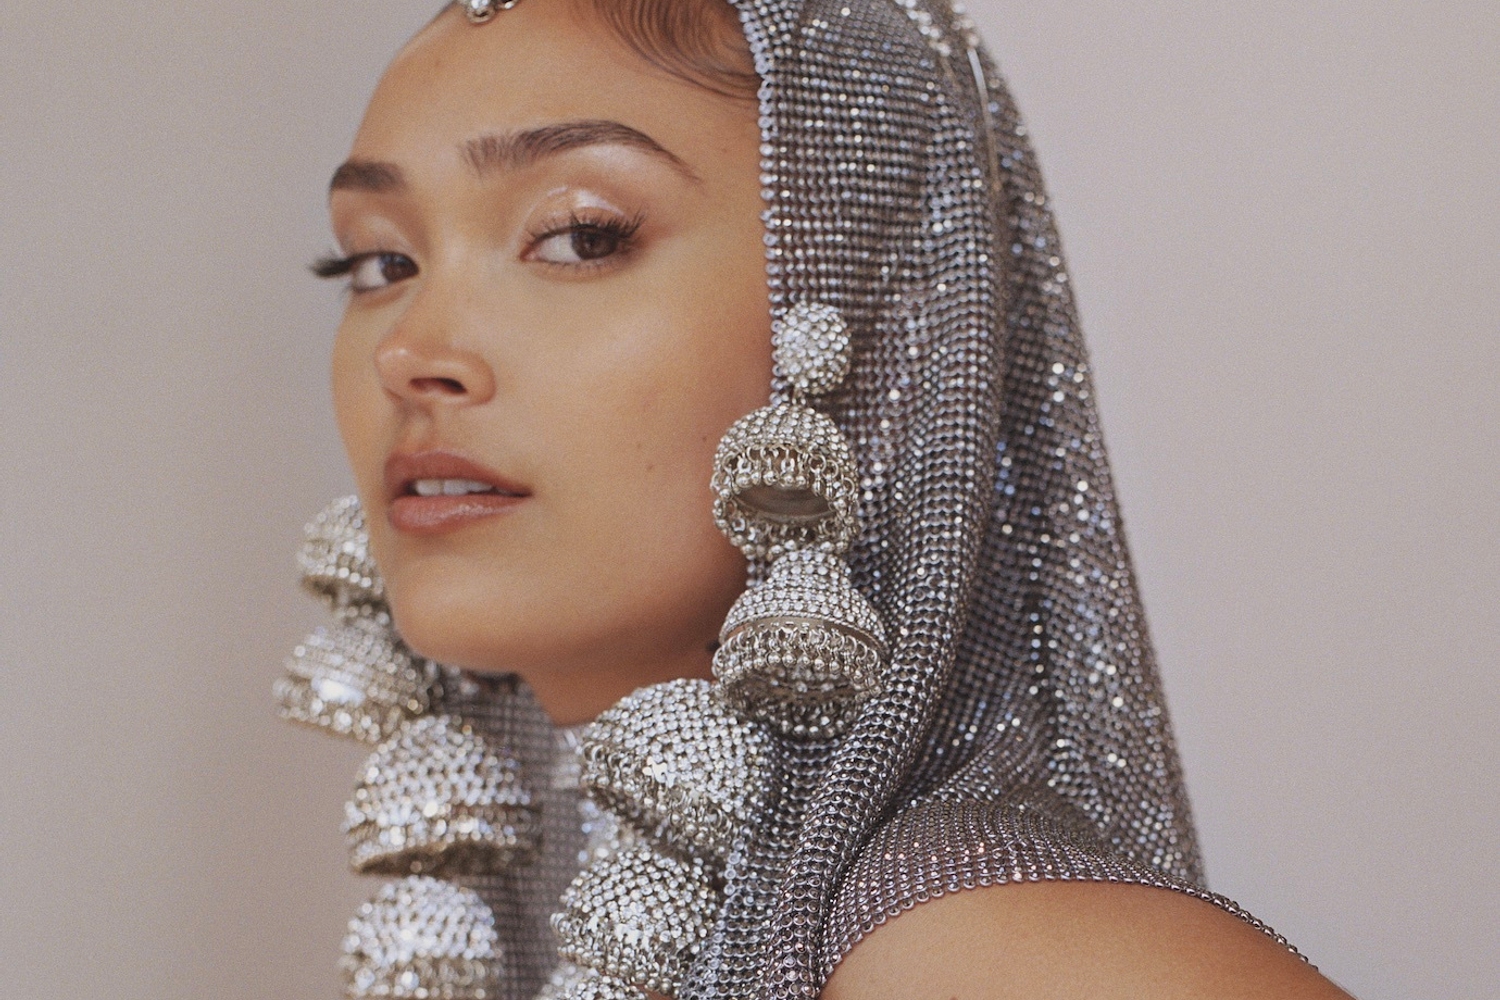 Joy Crookes offers up new single 'Trouble'